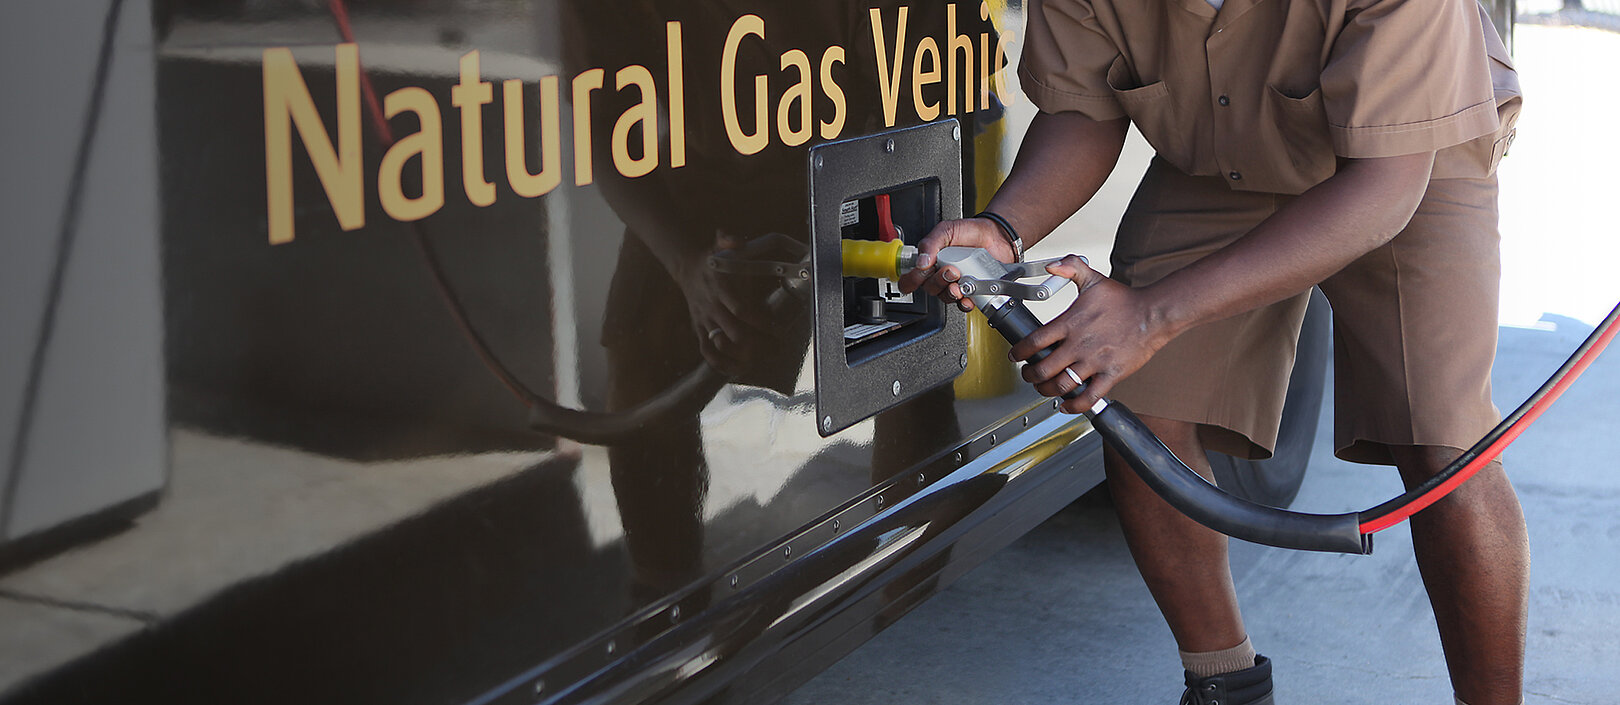 CNG Refueling of a Van with Oasis Fill Valve